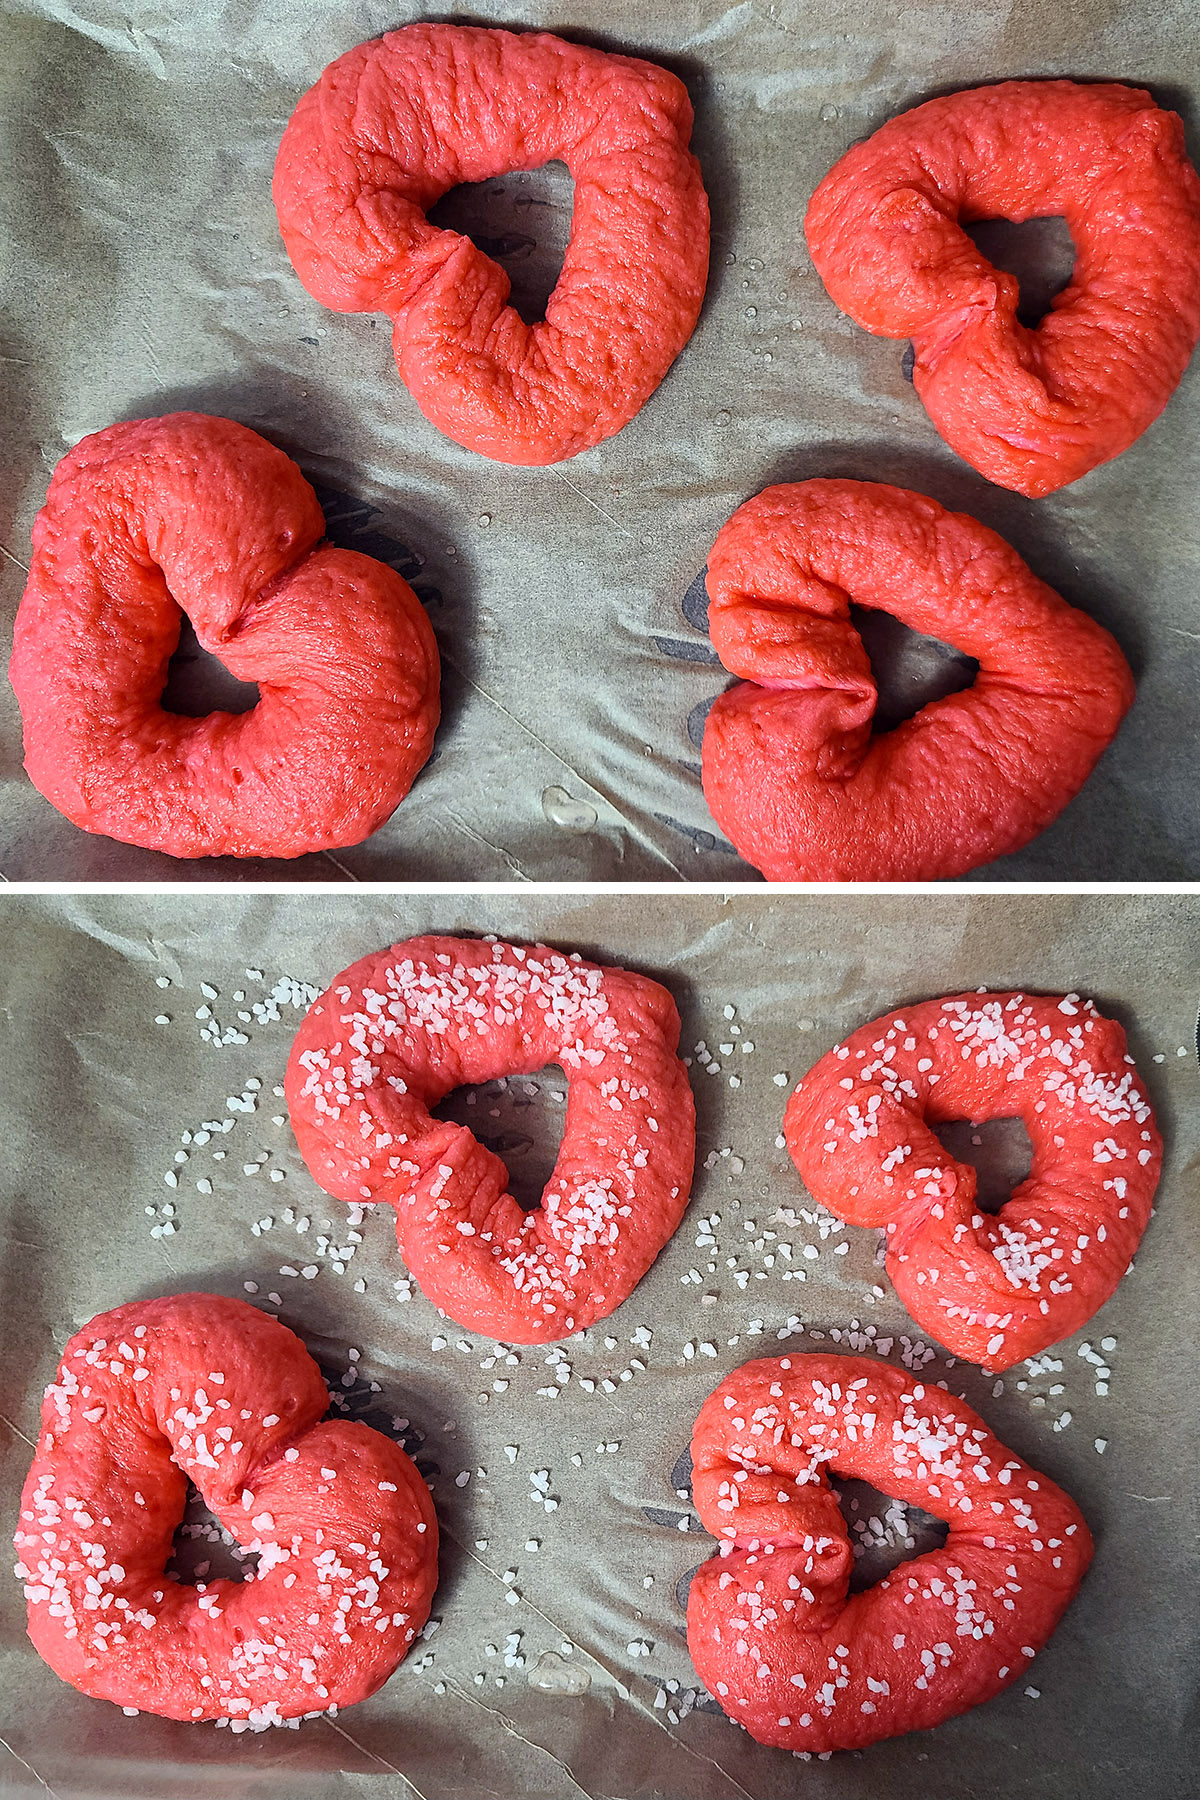 A 2 part image showing a pan of unbaked pink heart bagels, before and after being sprinkled with coarse sugar.